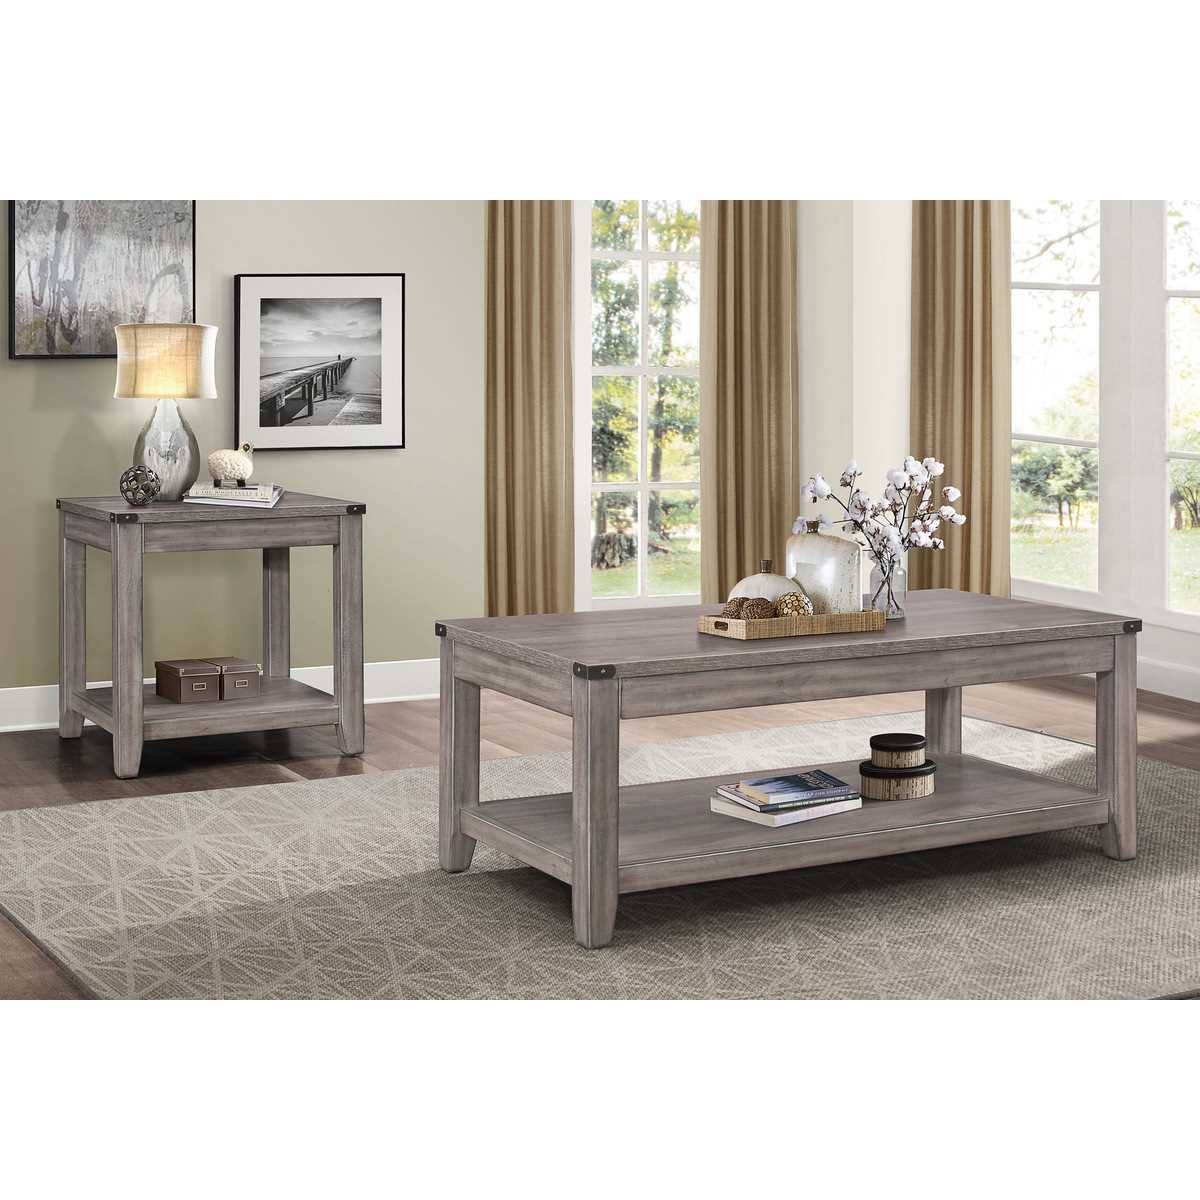 Woodrow Coffee Table Collection 2042